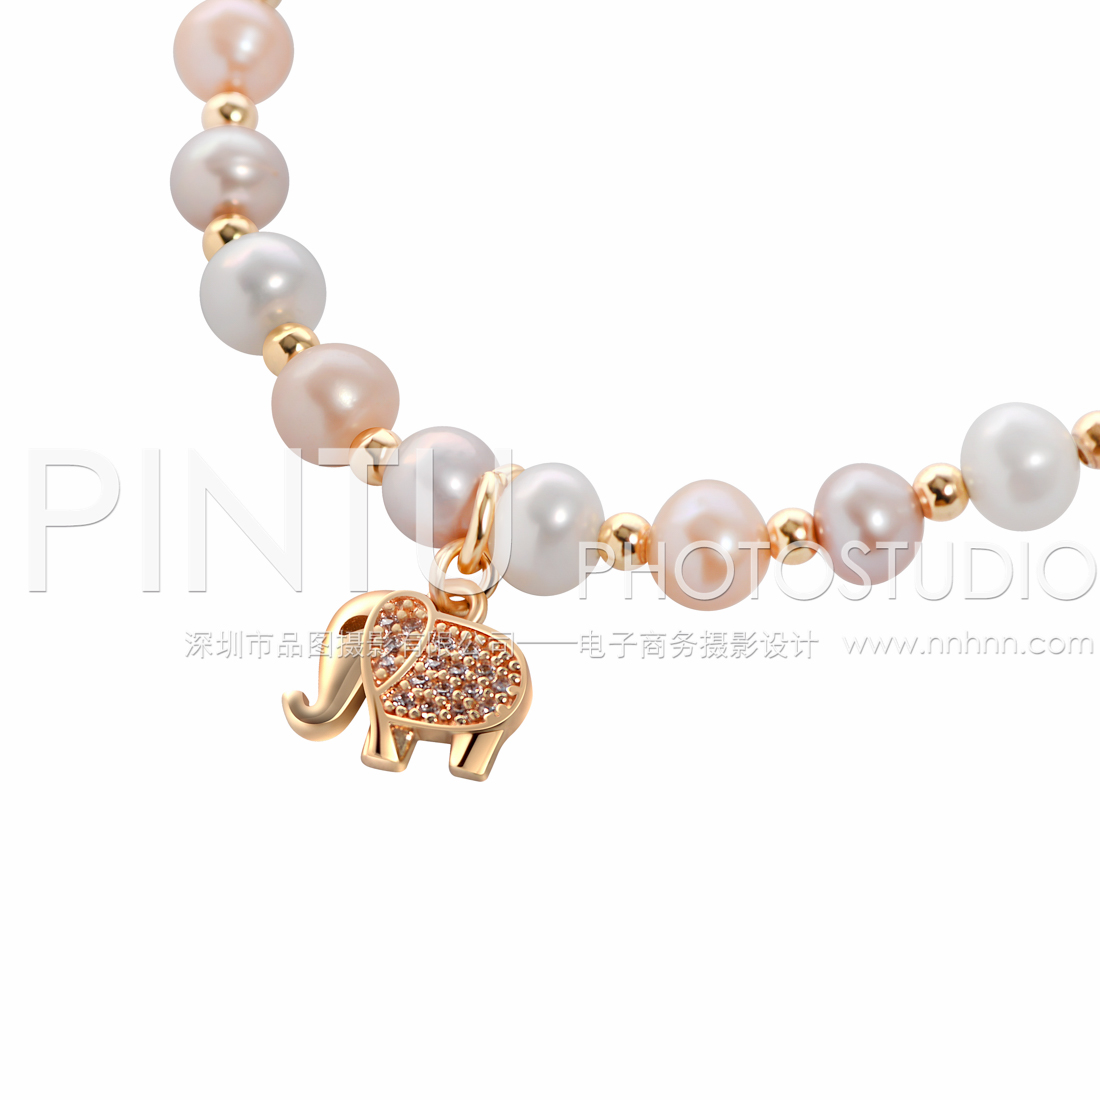 Photography bracelet for fashion jewelry products in China Close-up 3